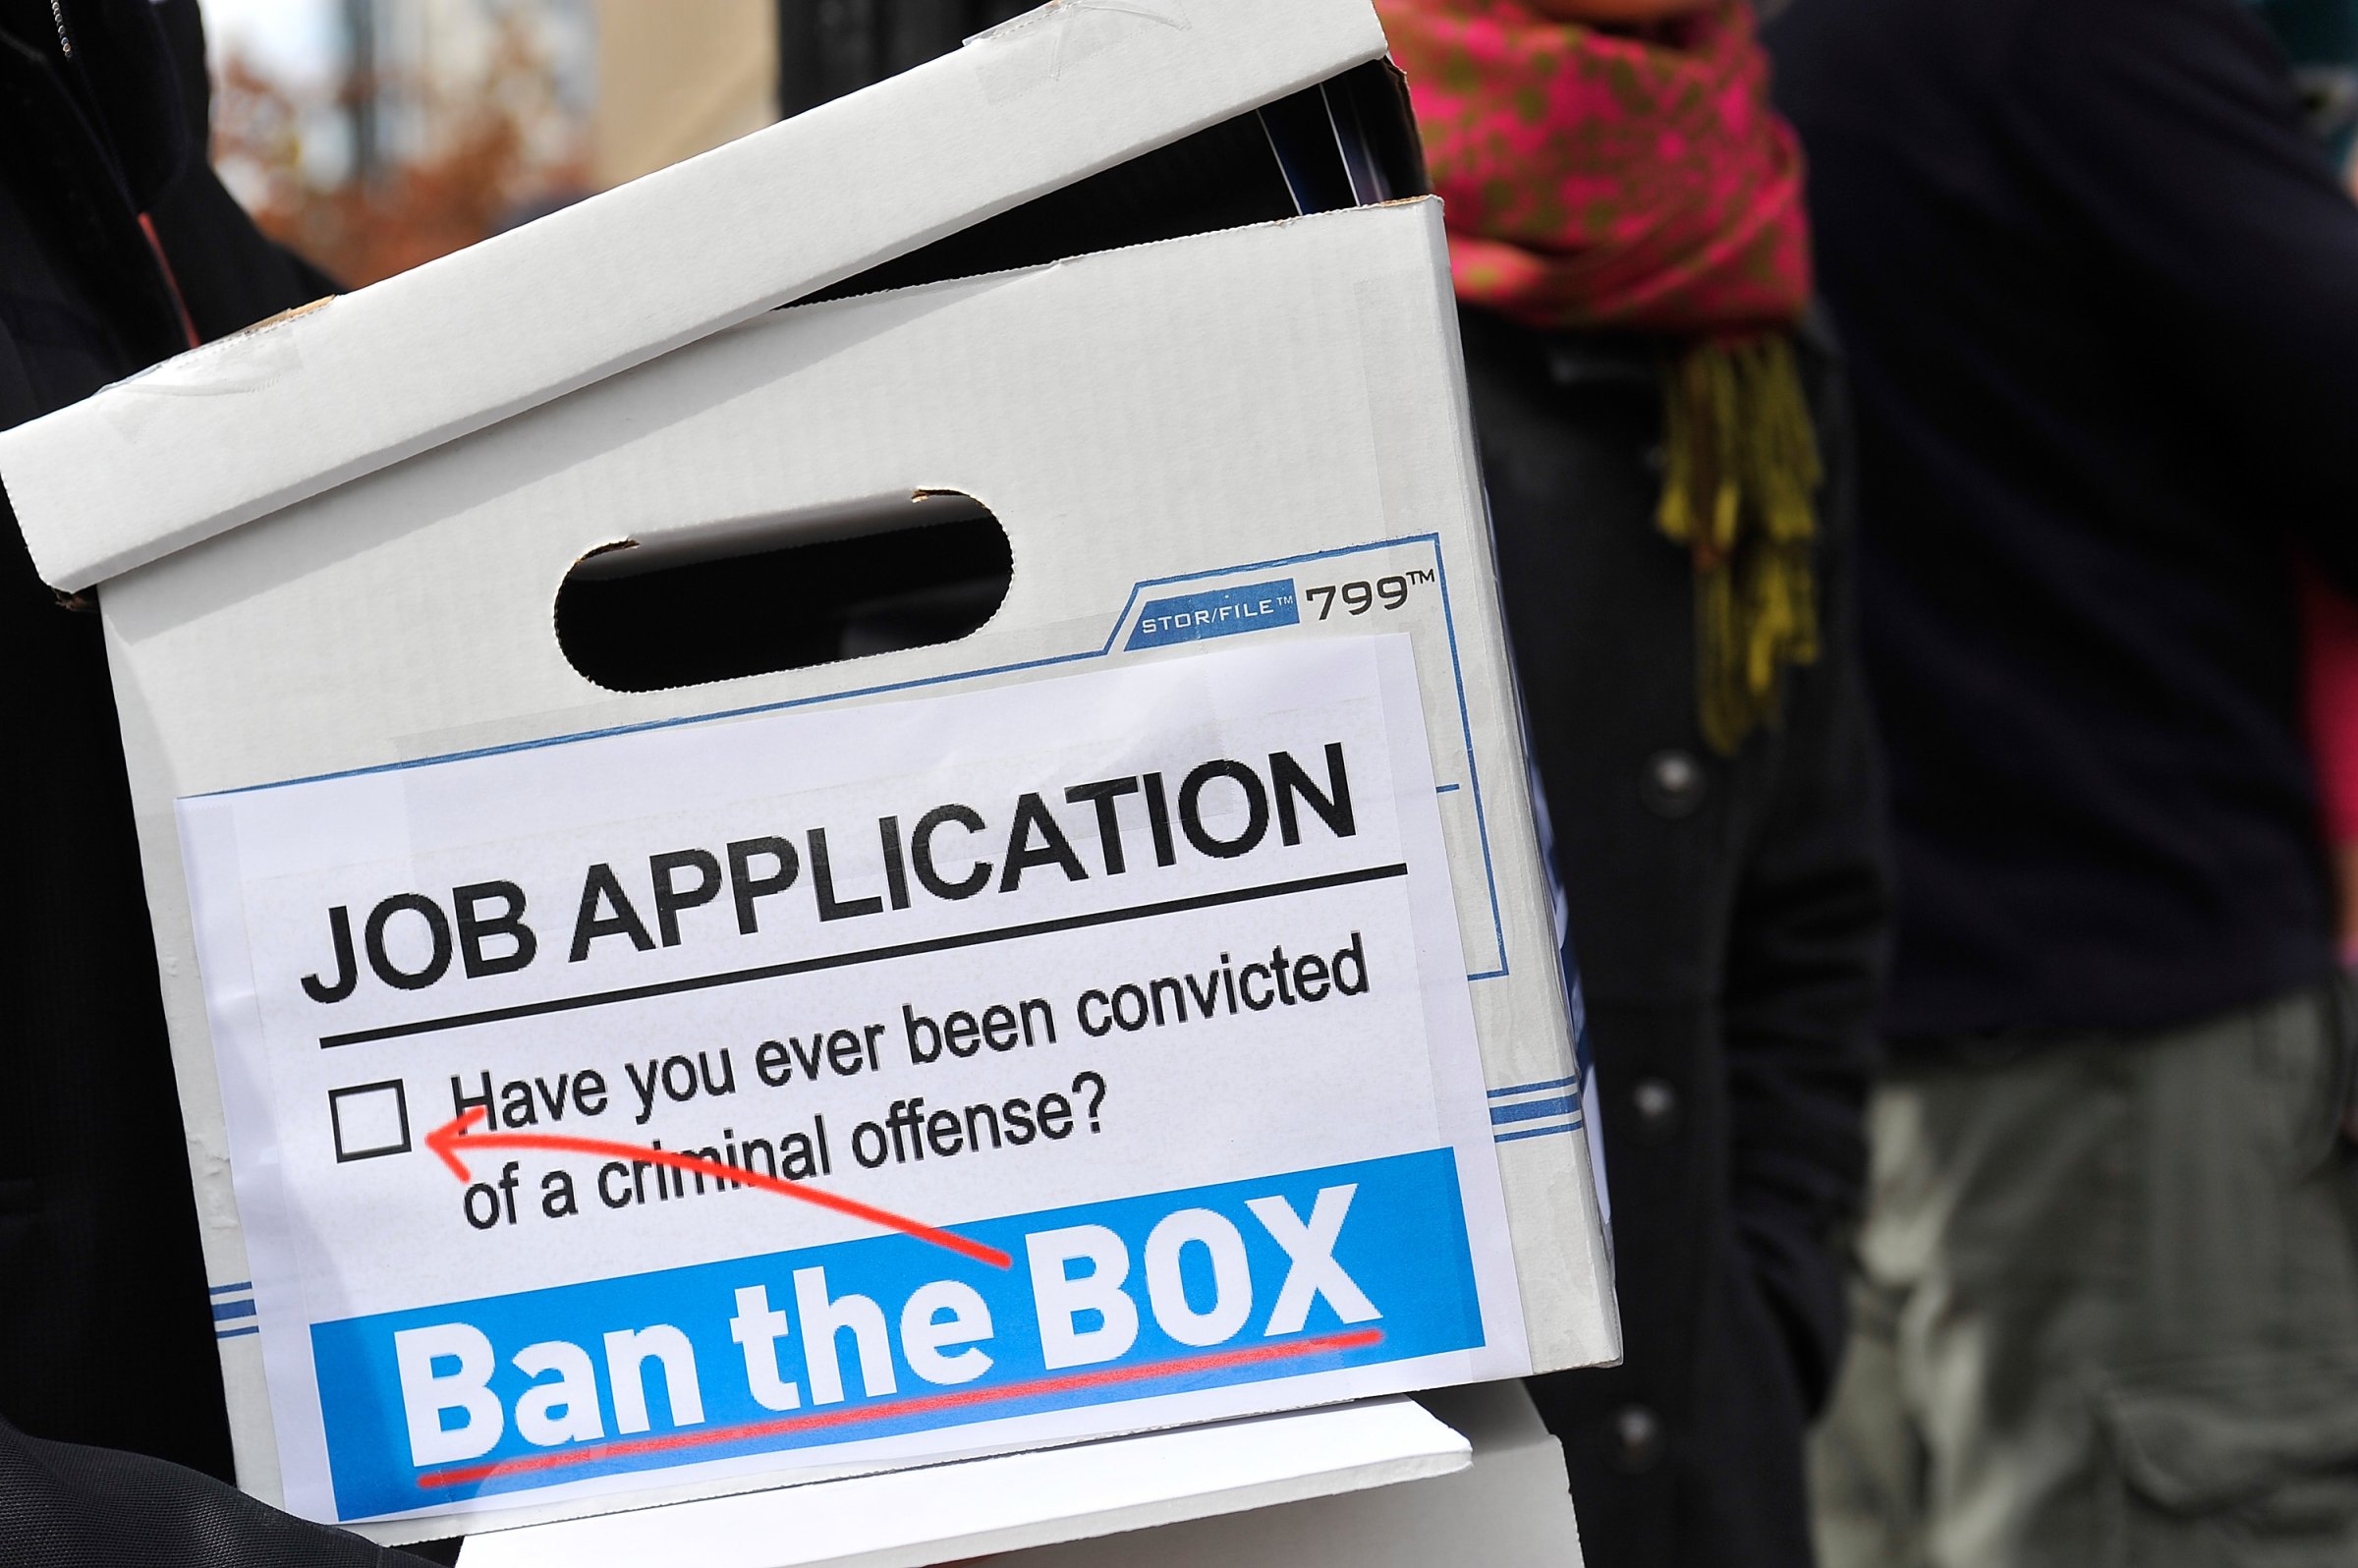 Outreach materials at a press conference for the Ban The Box Petition Delivery to The White House in Washington, D.C., on Oct. 26, 2015.